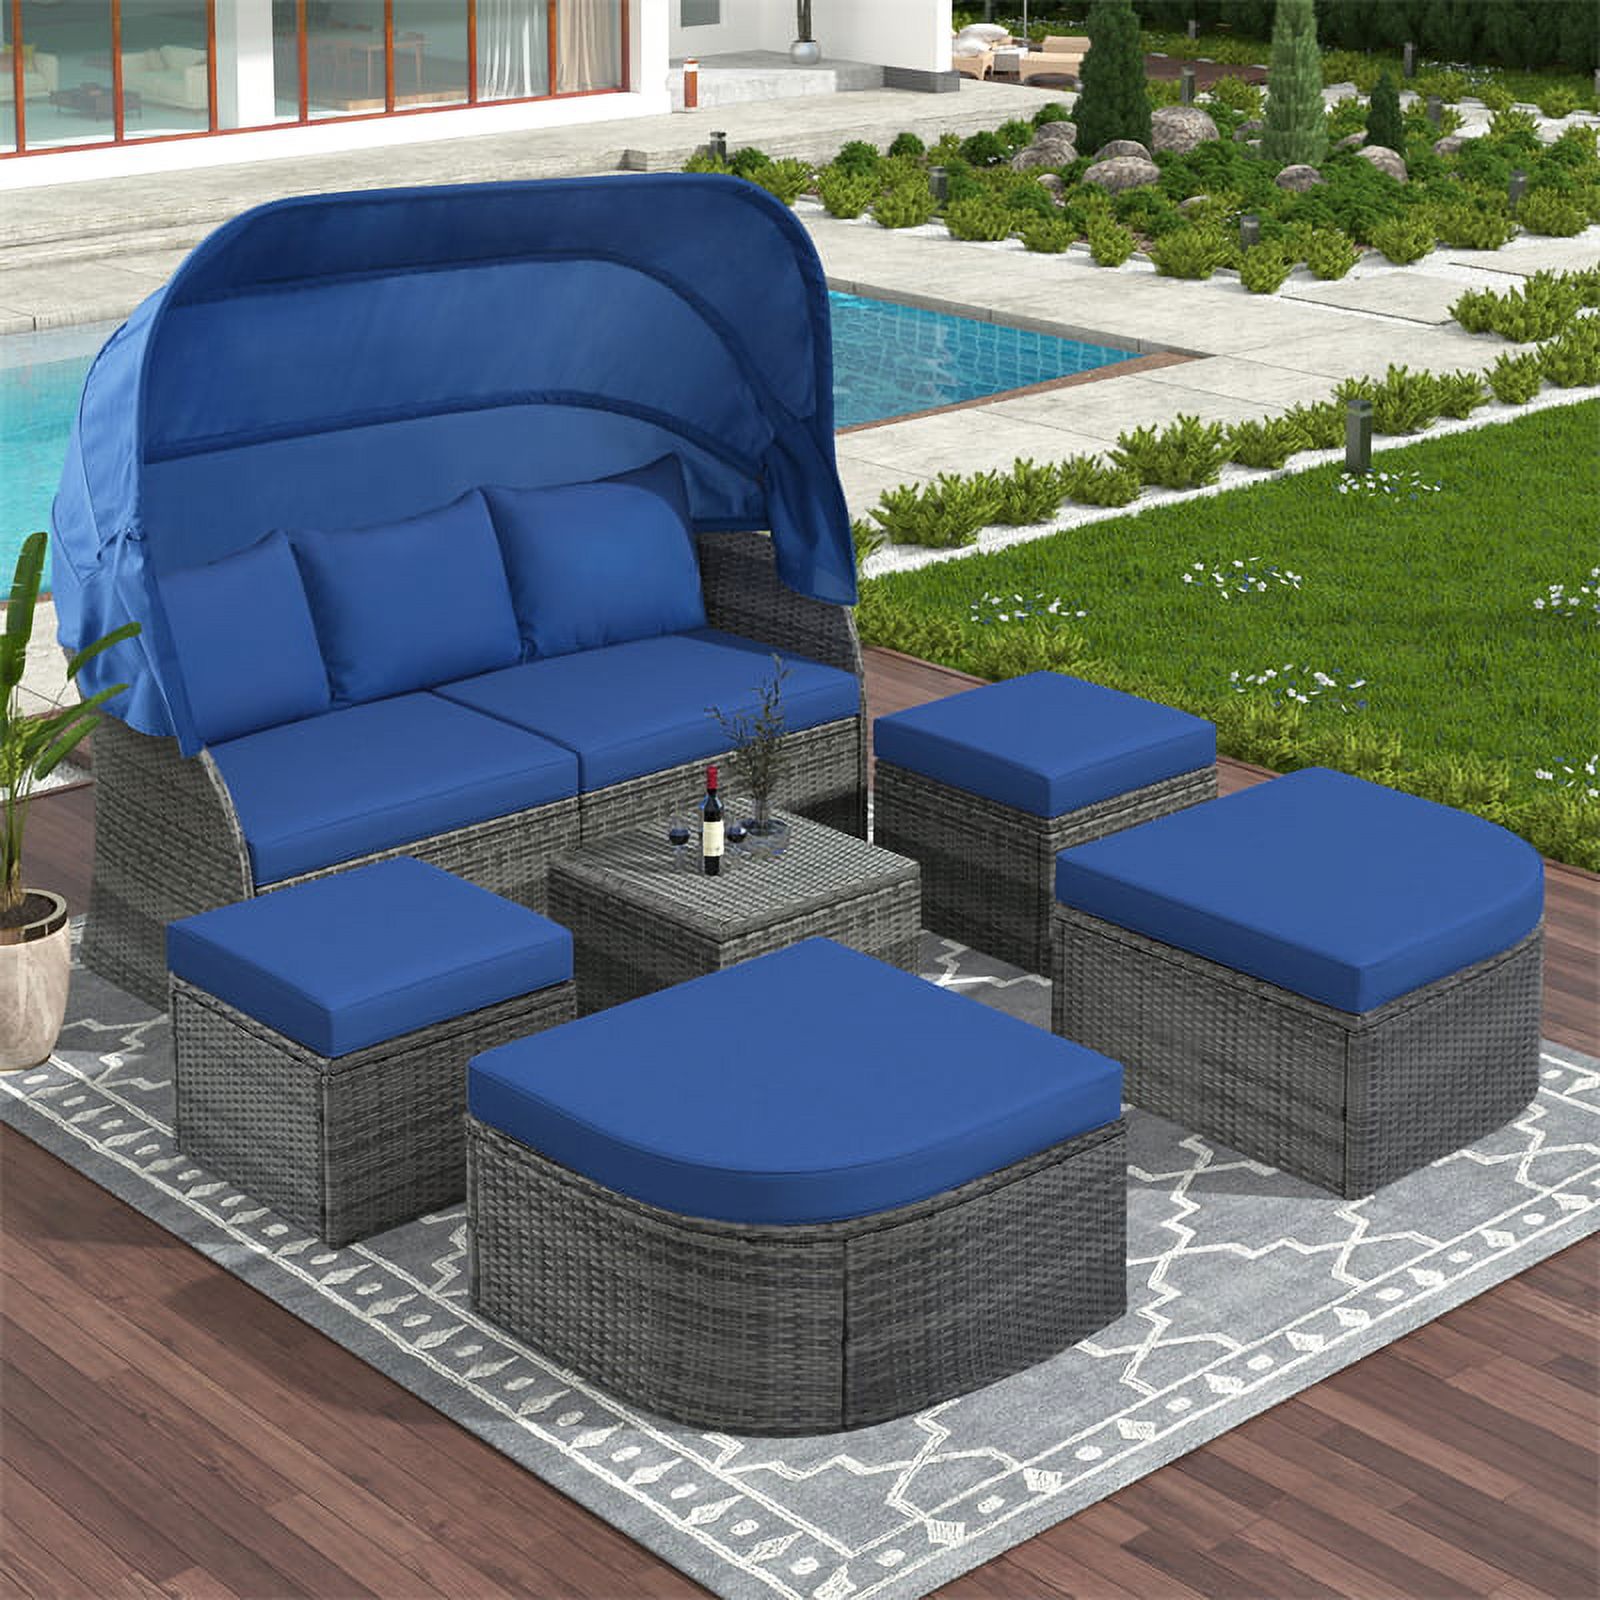 Outdoor Patio Daybed Sunbed, Rattan Lounge With Retractable Canopy, Wicker Rattan Separated Seating Sectional Sofa with Ottoman or Lift Top Coffee Table for Patio Lawn Garden, Blue - image 1 of 7